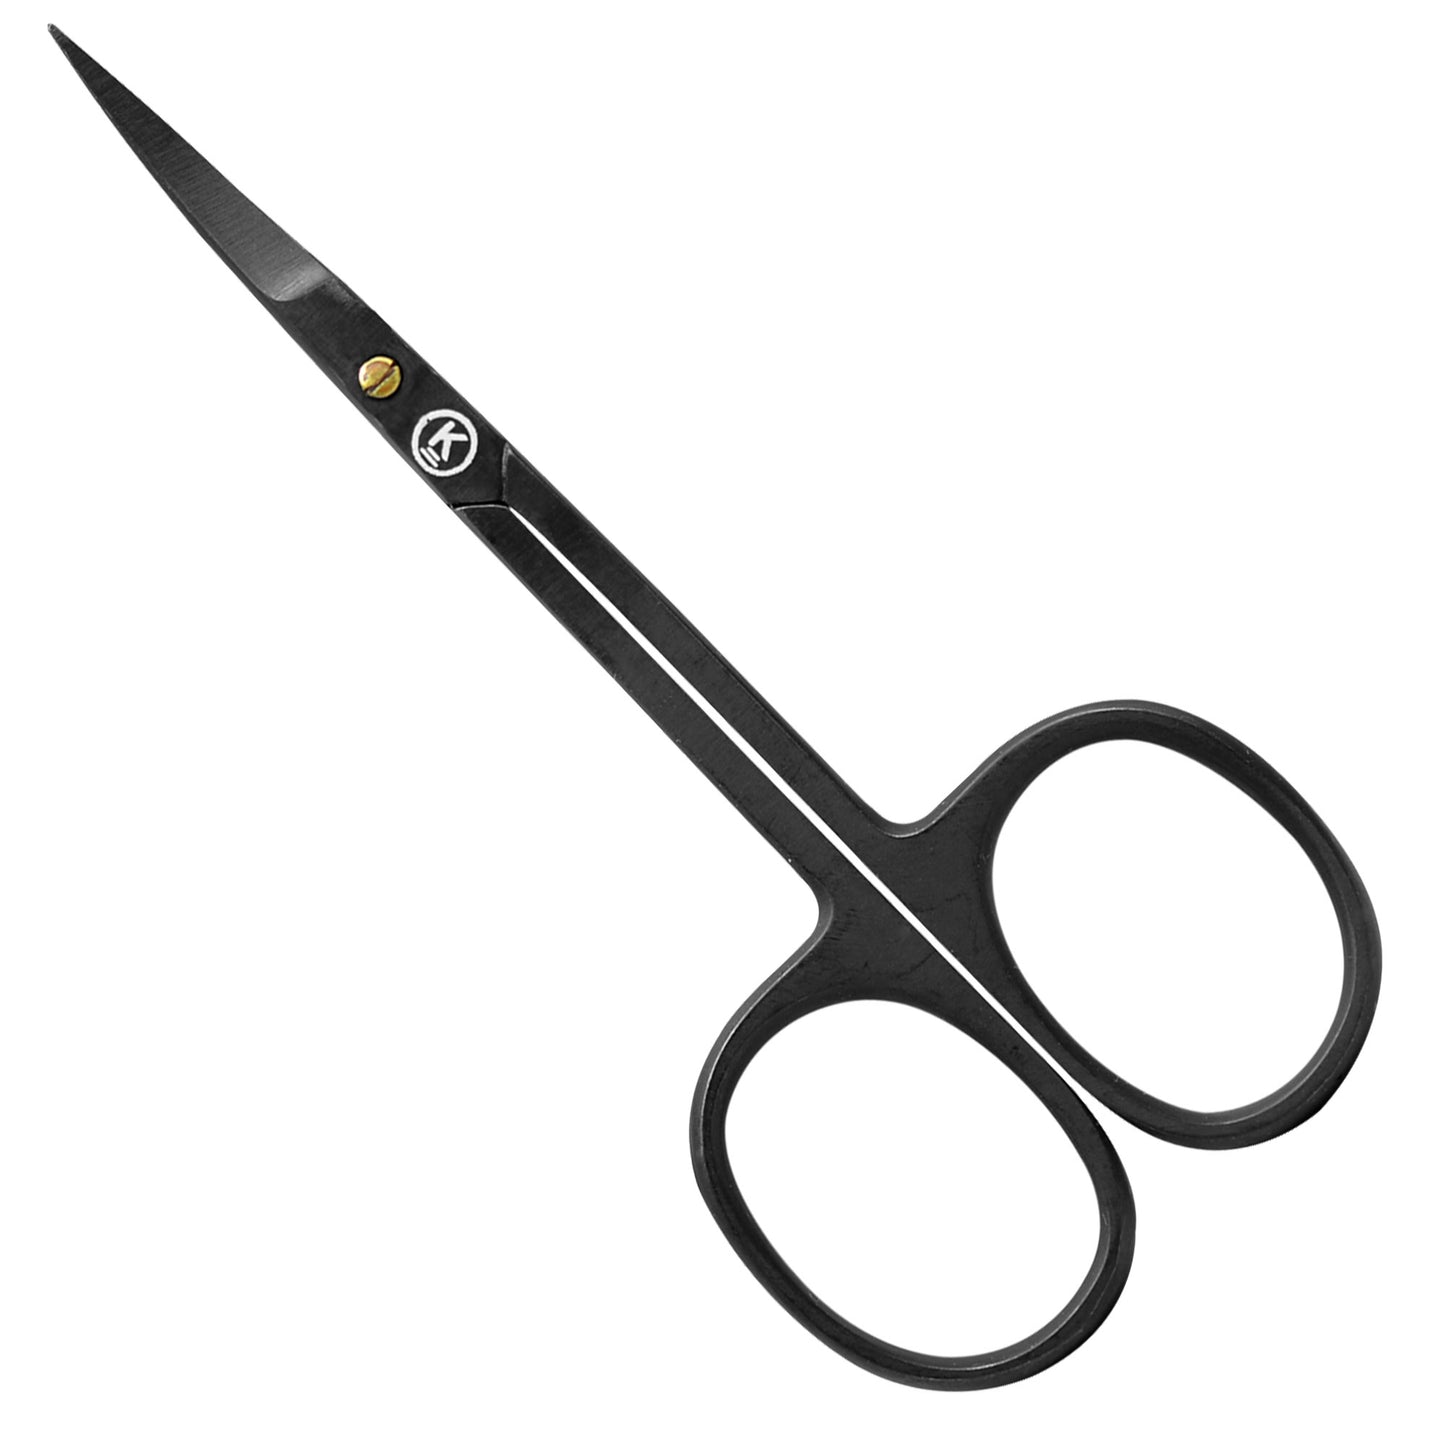 K-Pro cuticle scissors with tower tip